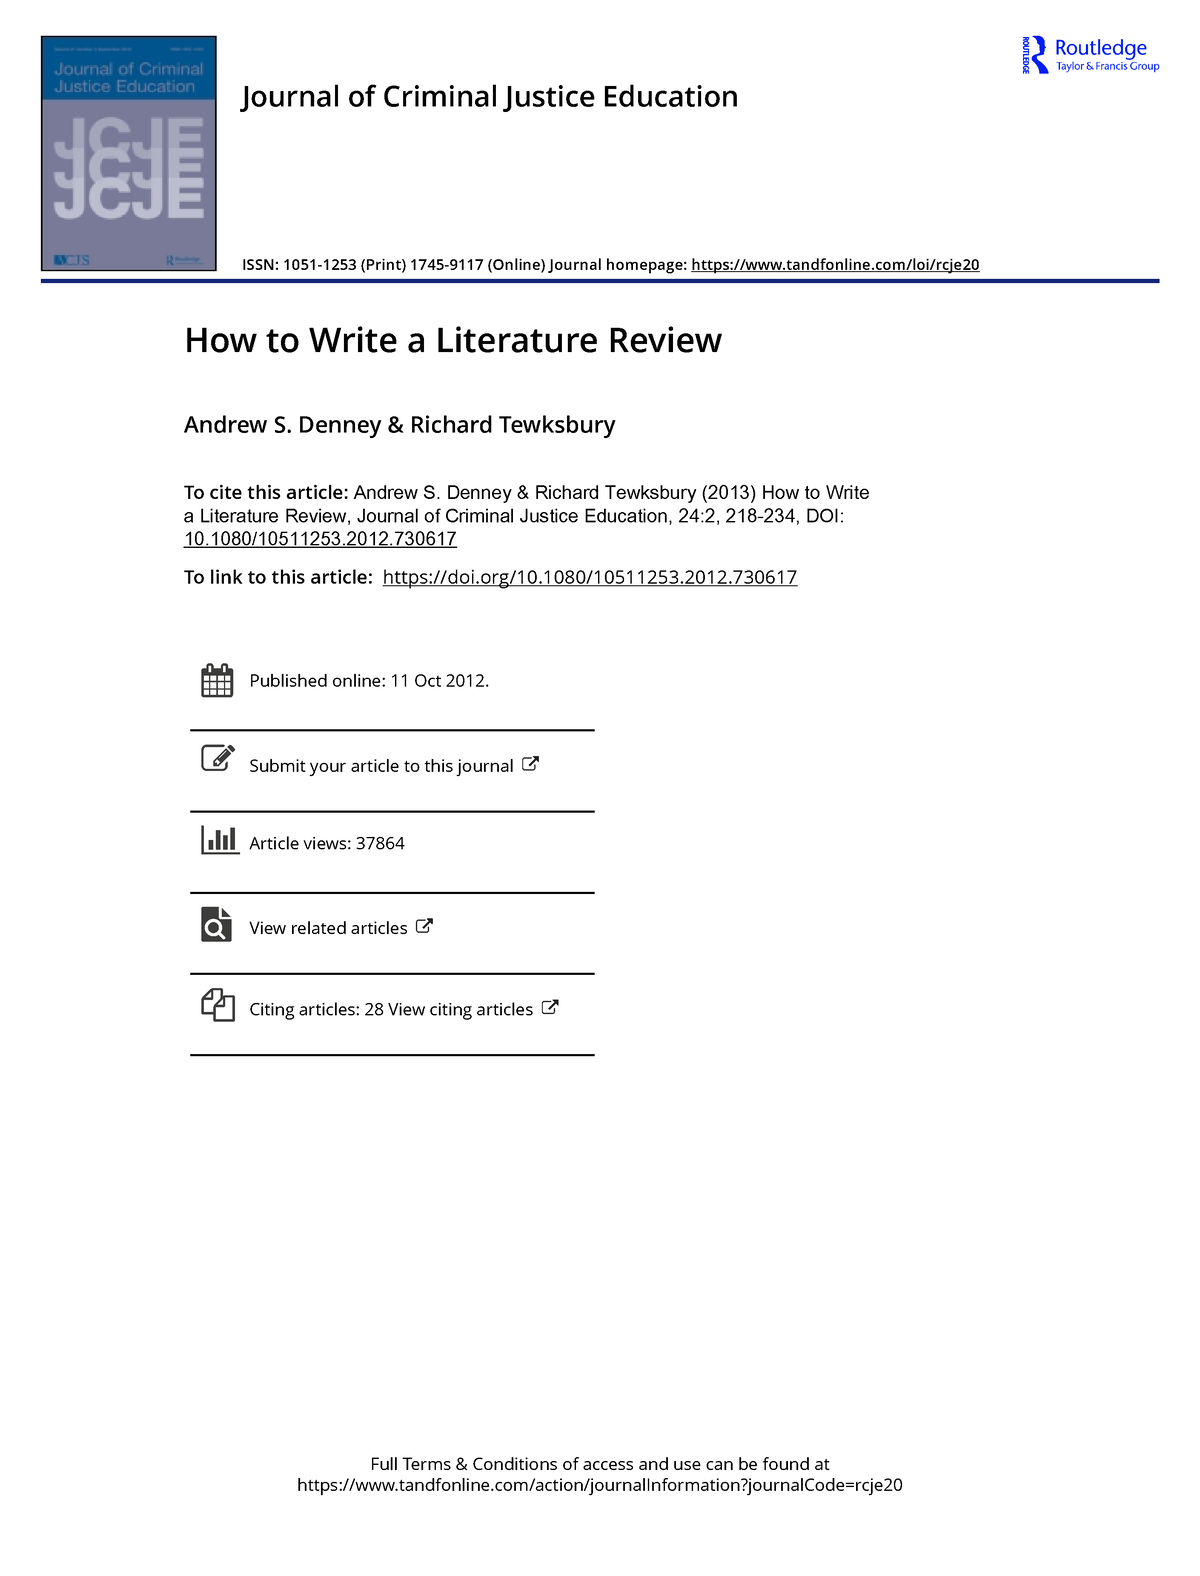 how to write a literature review denney and tewksbury